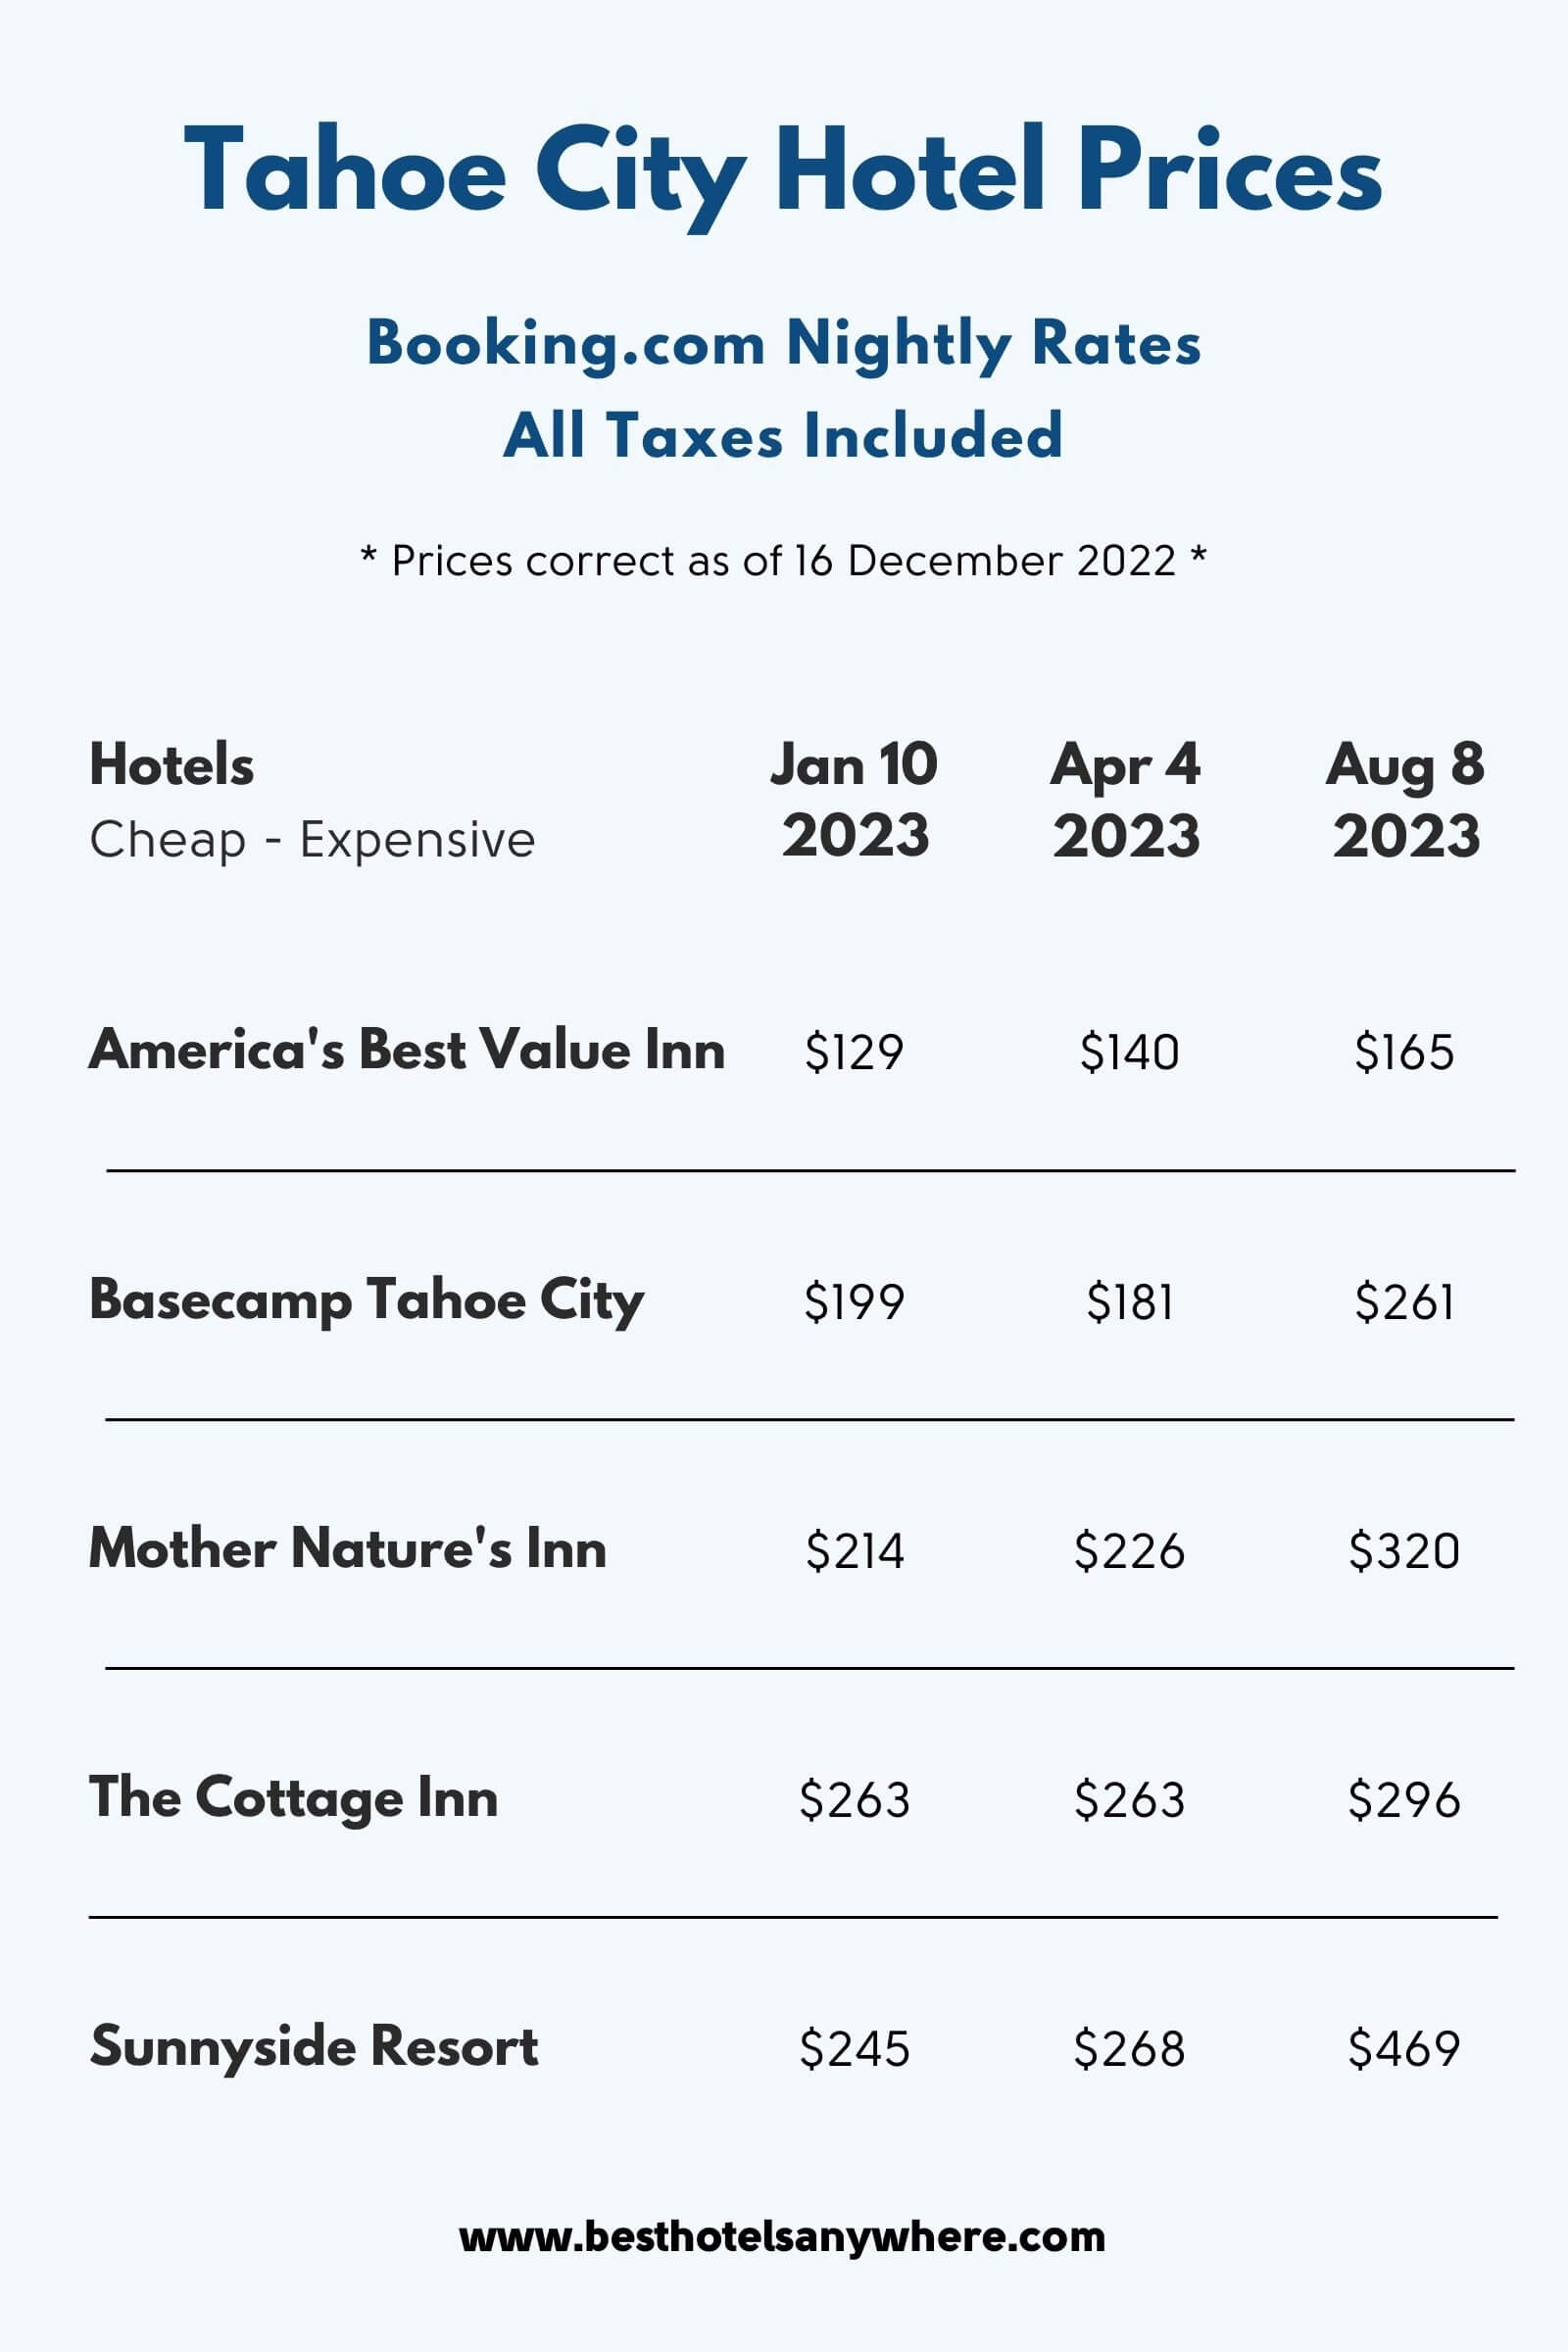 Nightly prices for the best hotels in Tahoe City CA infographic by Best Hotels Anywhere